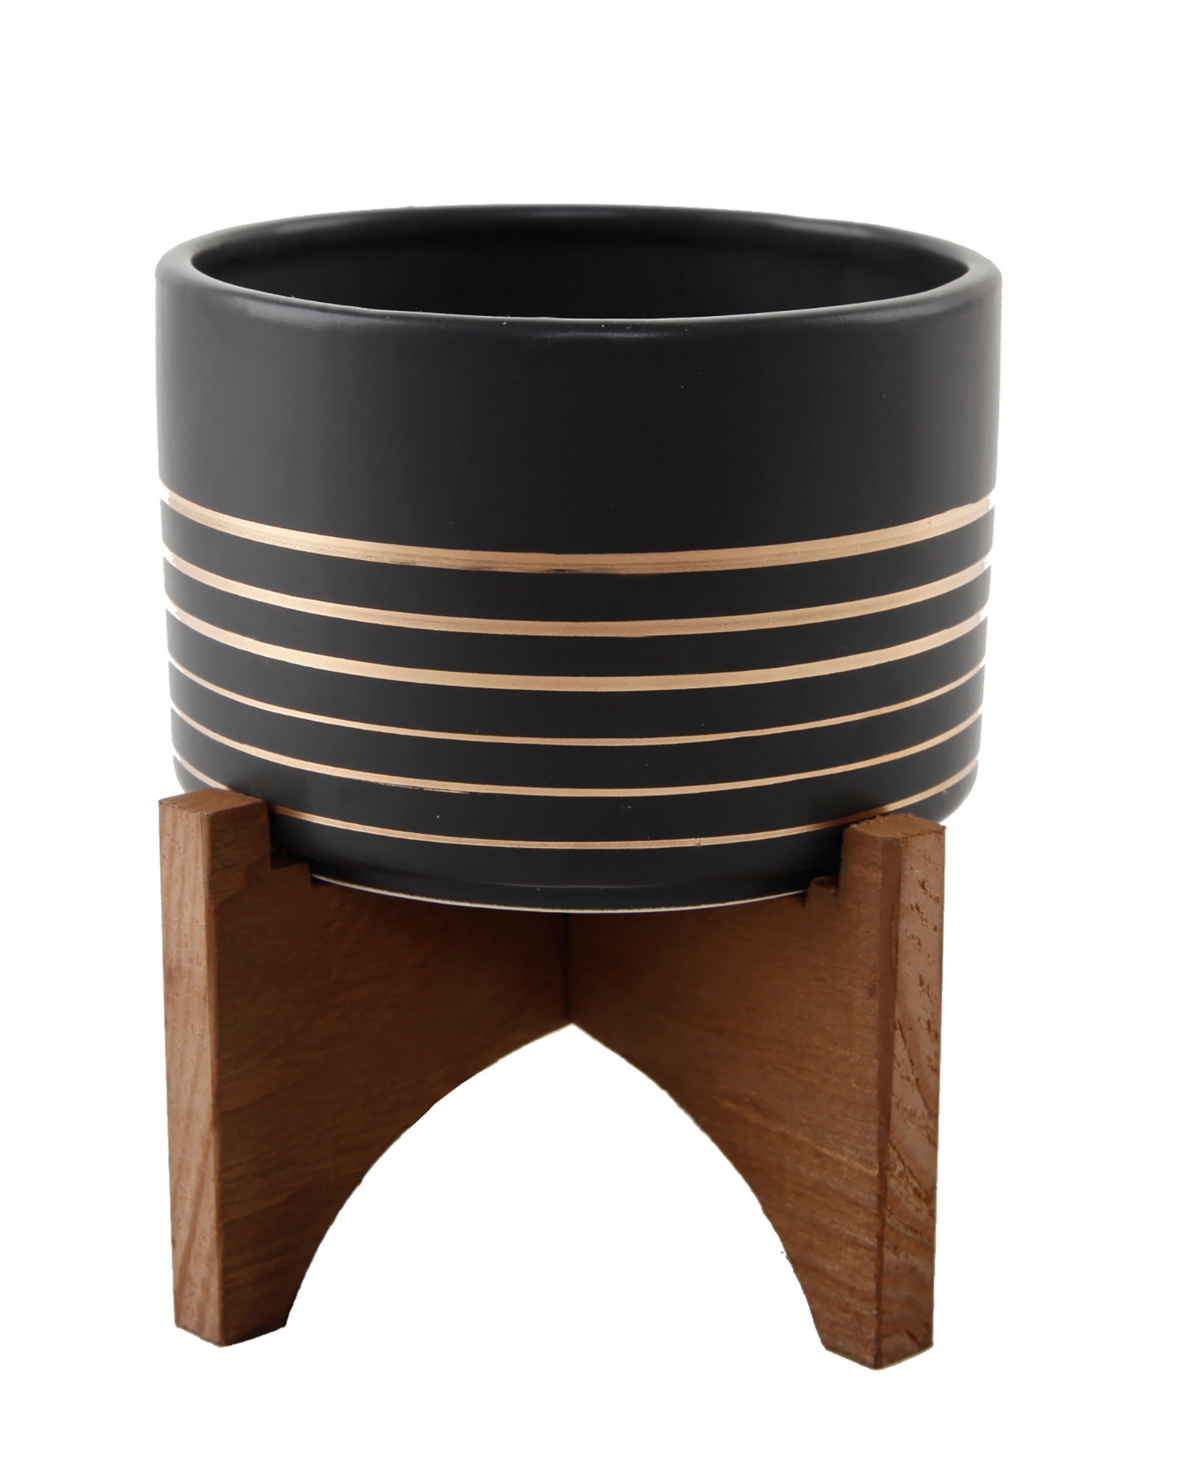 Ceramic Planter on Wood Stand, 5.5" - Black and Gold-Tone